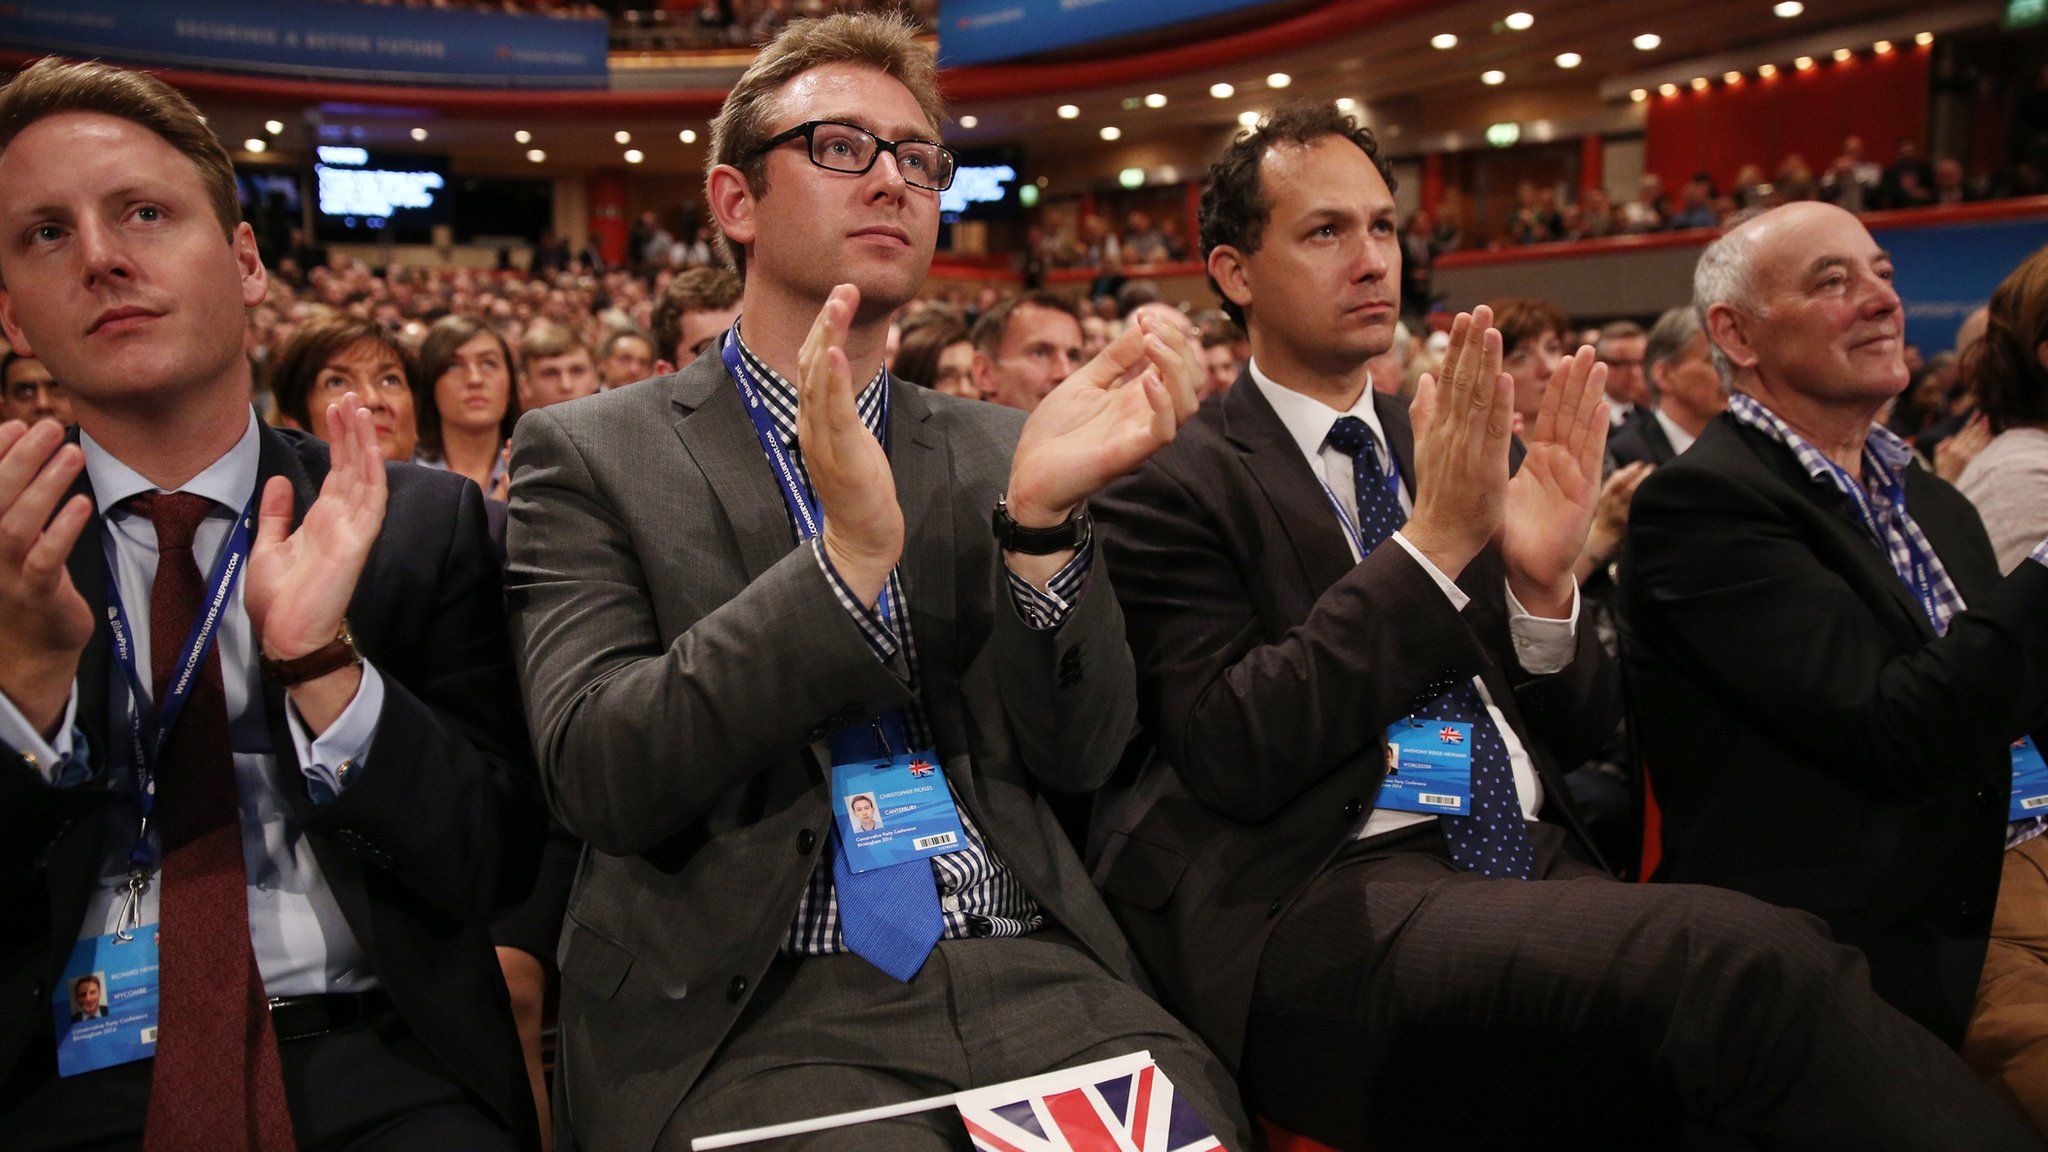 Delegates at Conservative Party conference